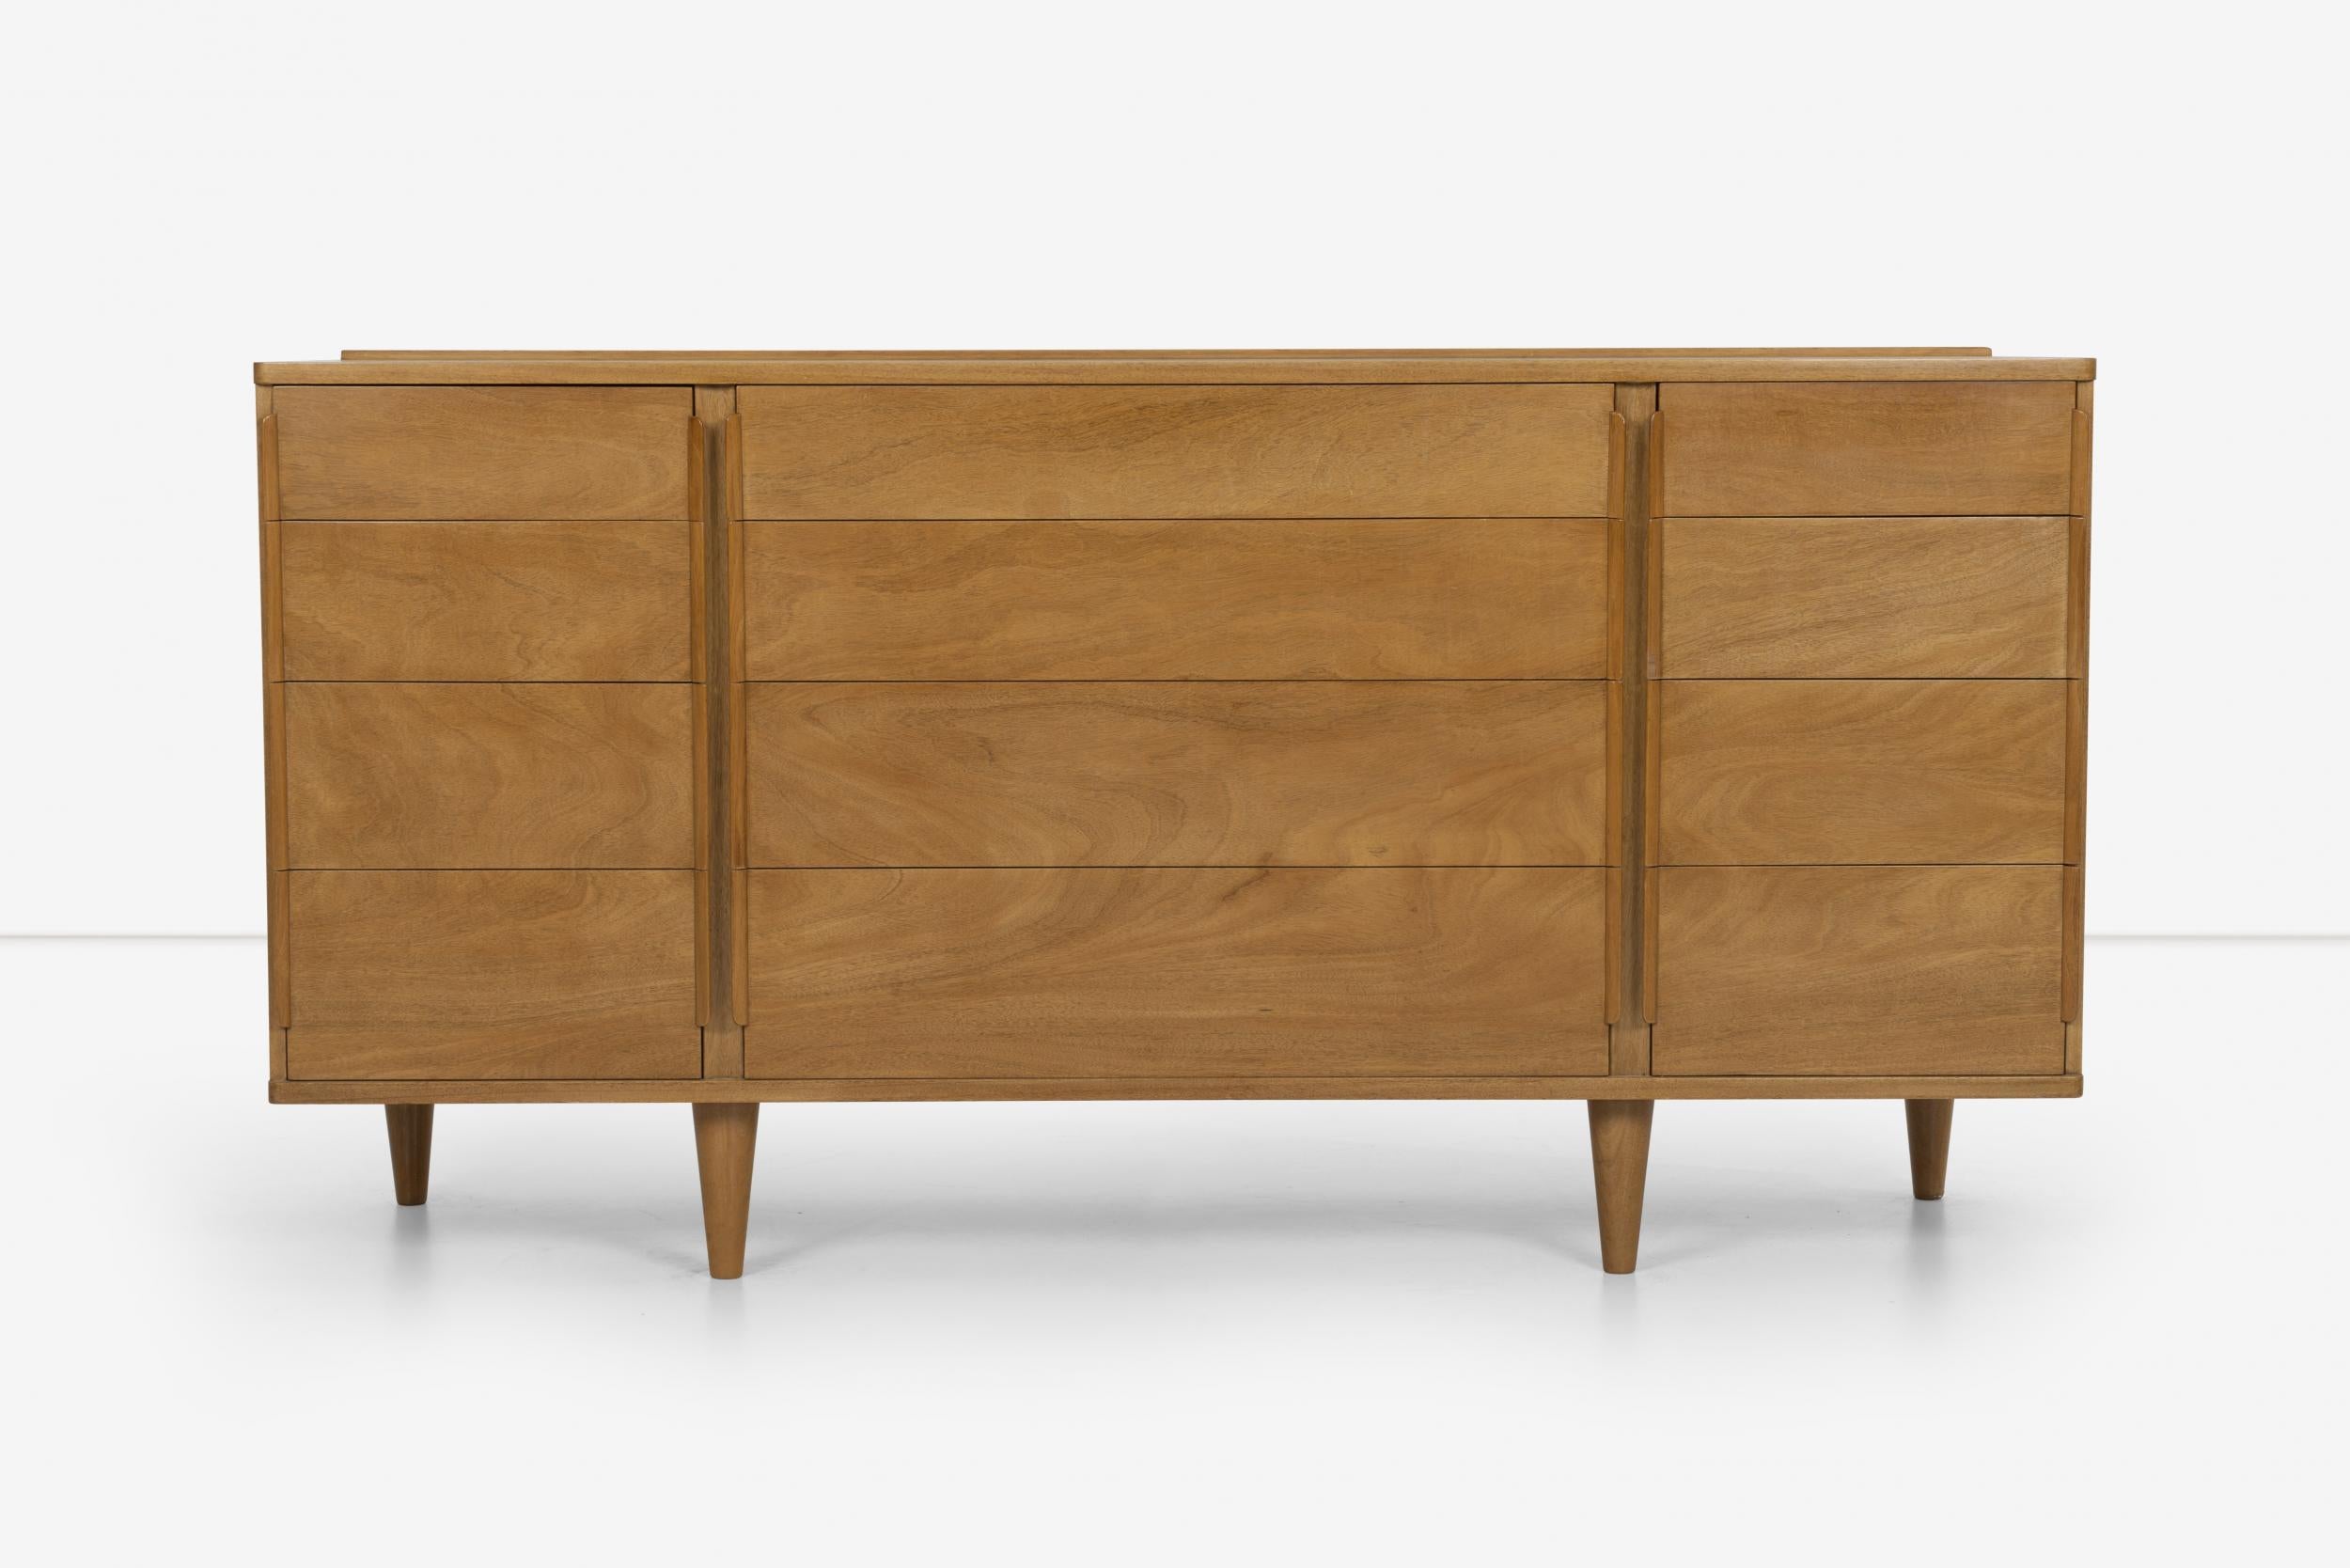 Edward Wormley for Dunbar triple dresser in mahogany wood,1952 Model 5272 features 12-drawer storage with solid turned tapered legs and curved pulls. 
Label inside drawer, [DUNBAR].






  